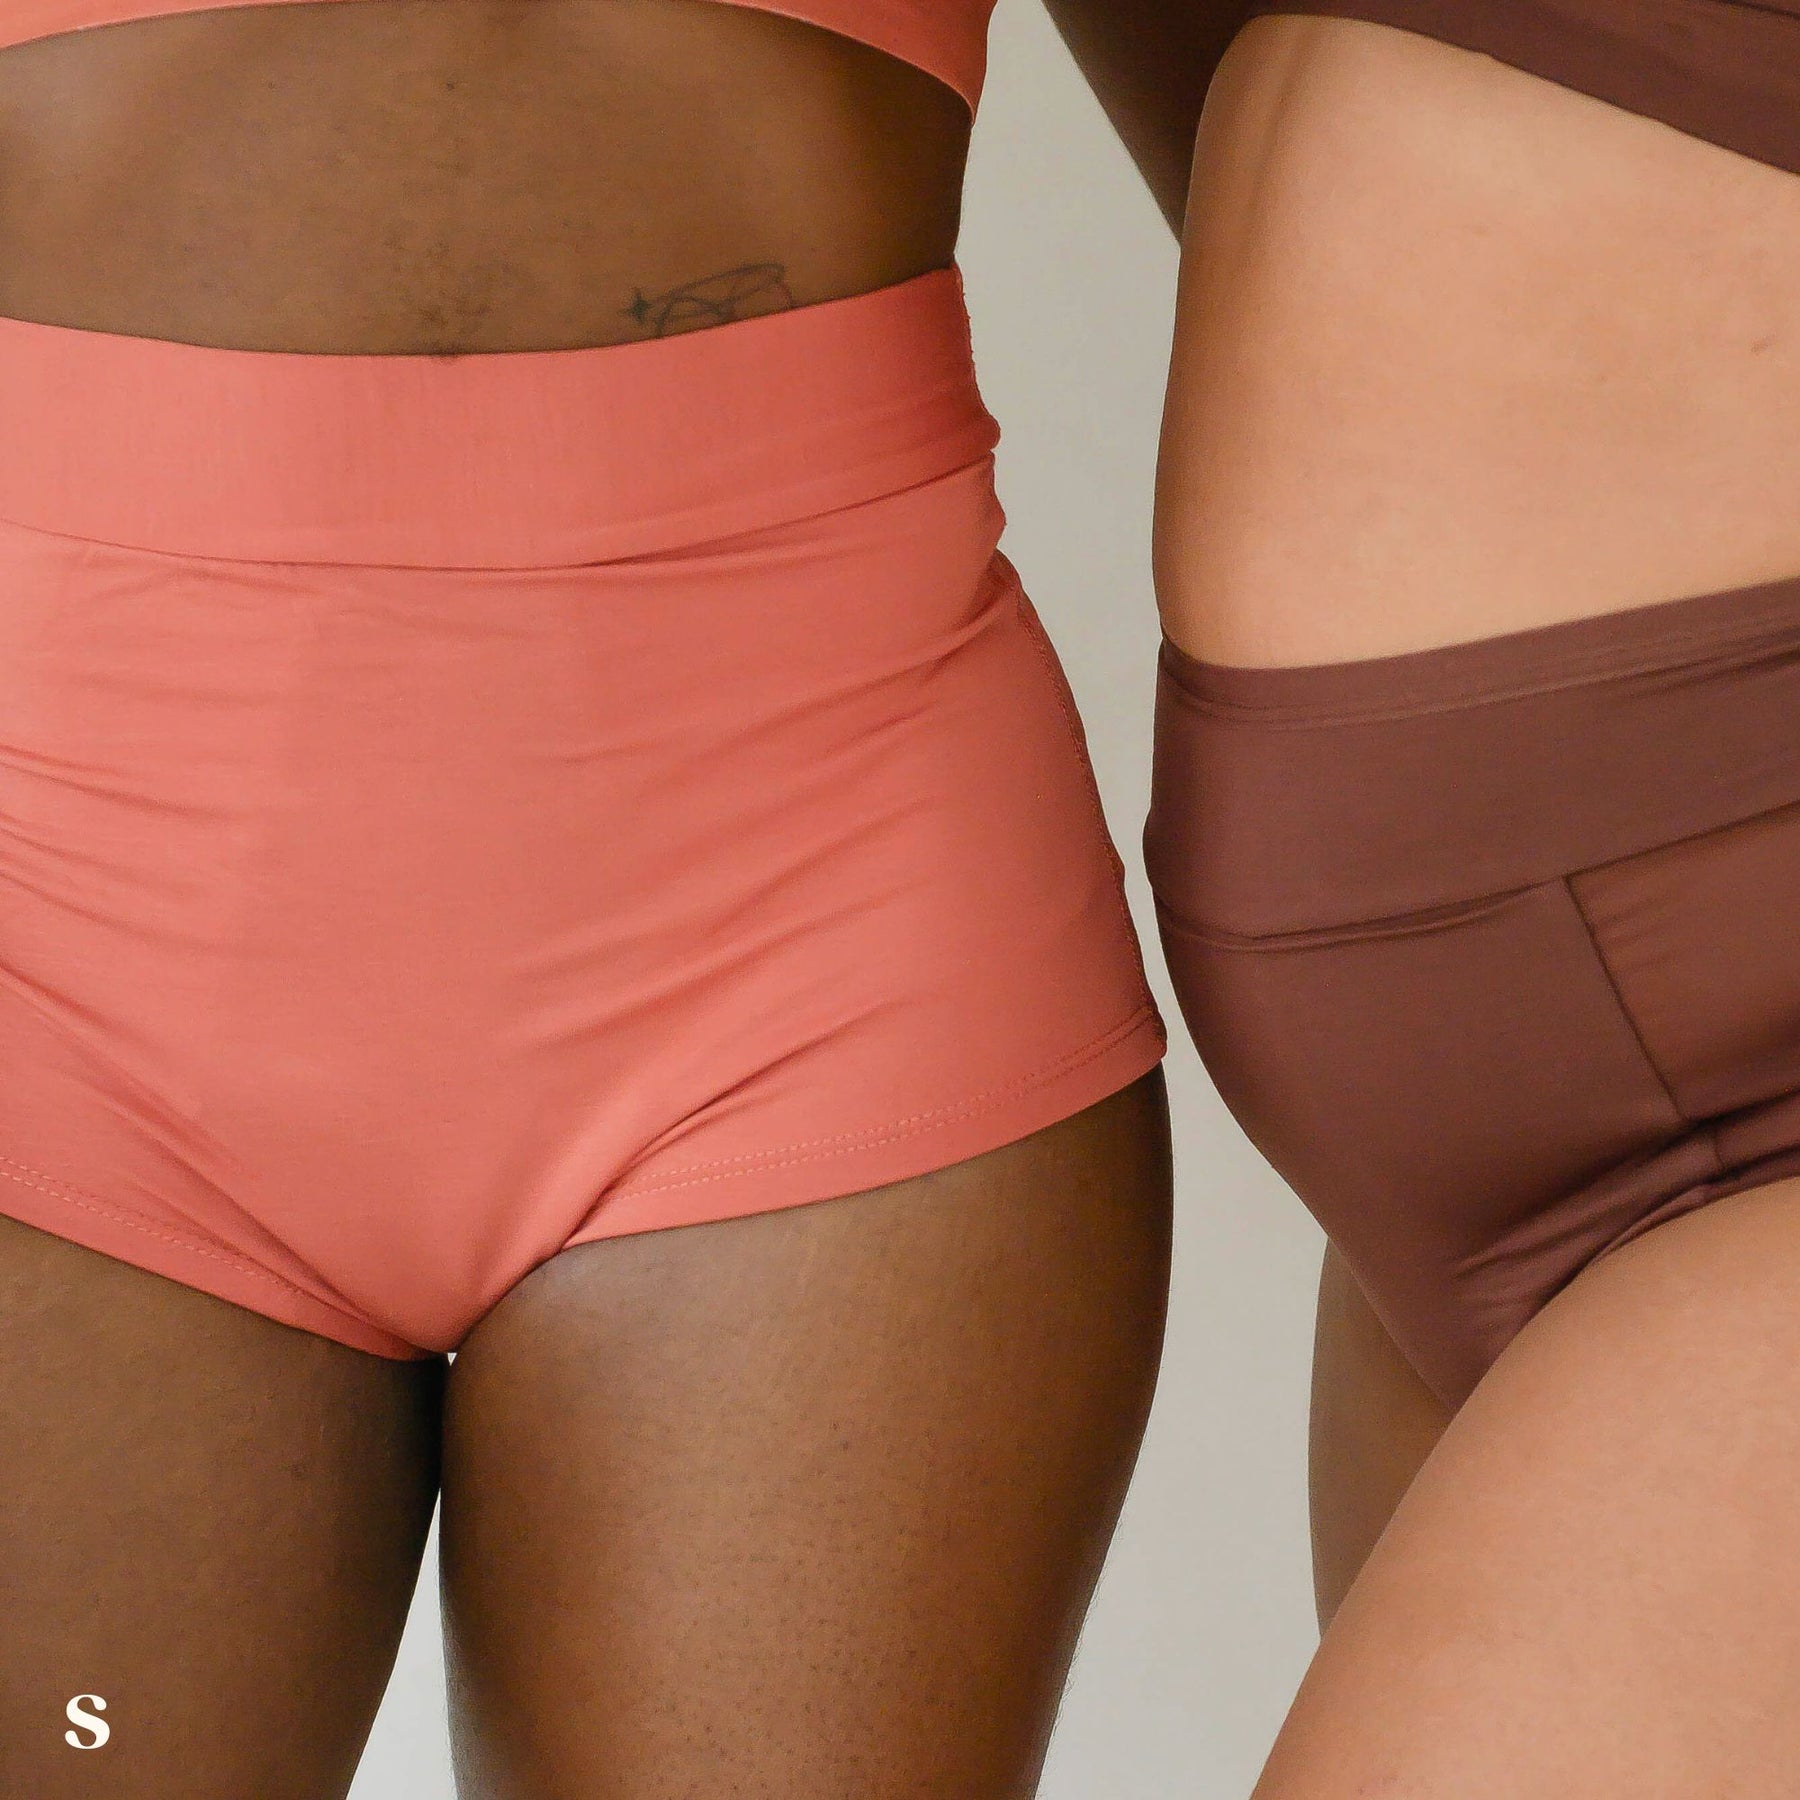 11 Pairs of High Waisted Underwear That Are More 'Sexy' and Less 'Grandma